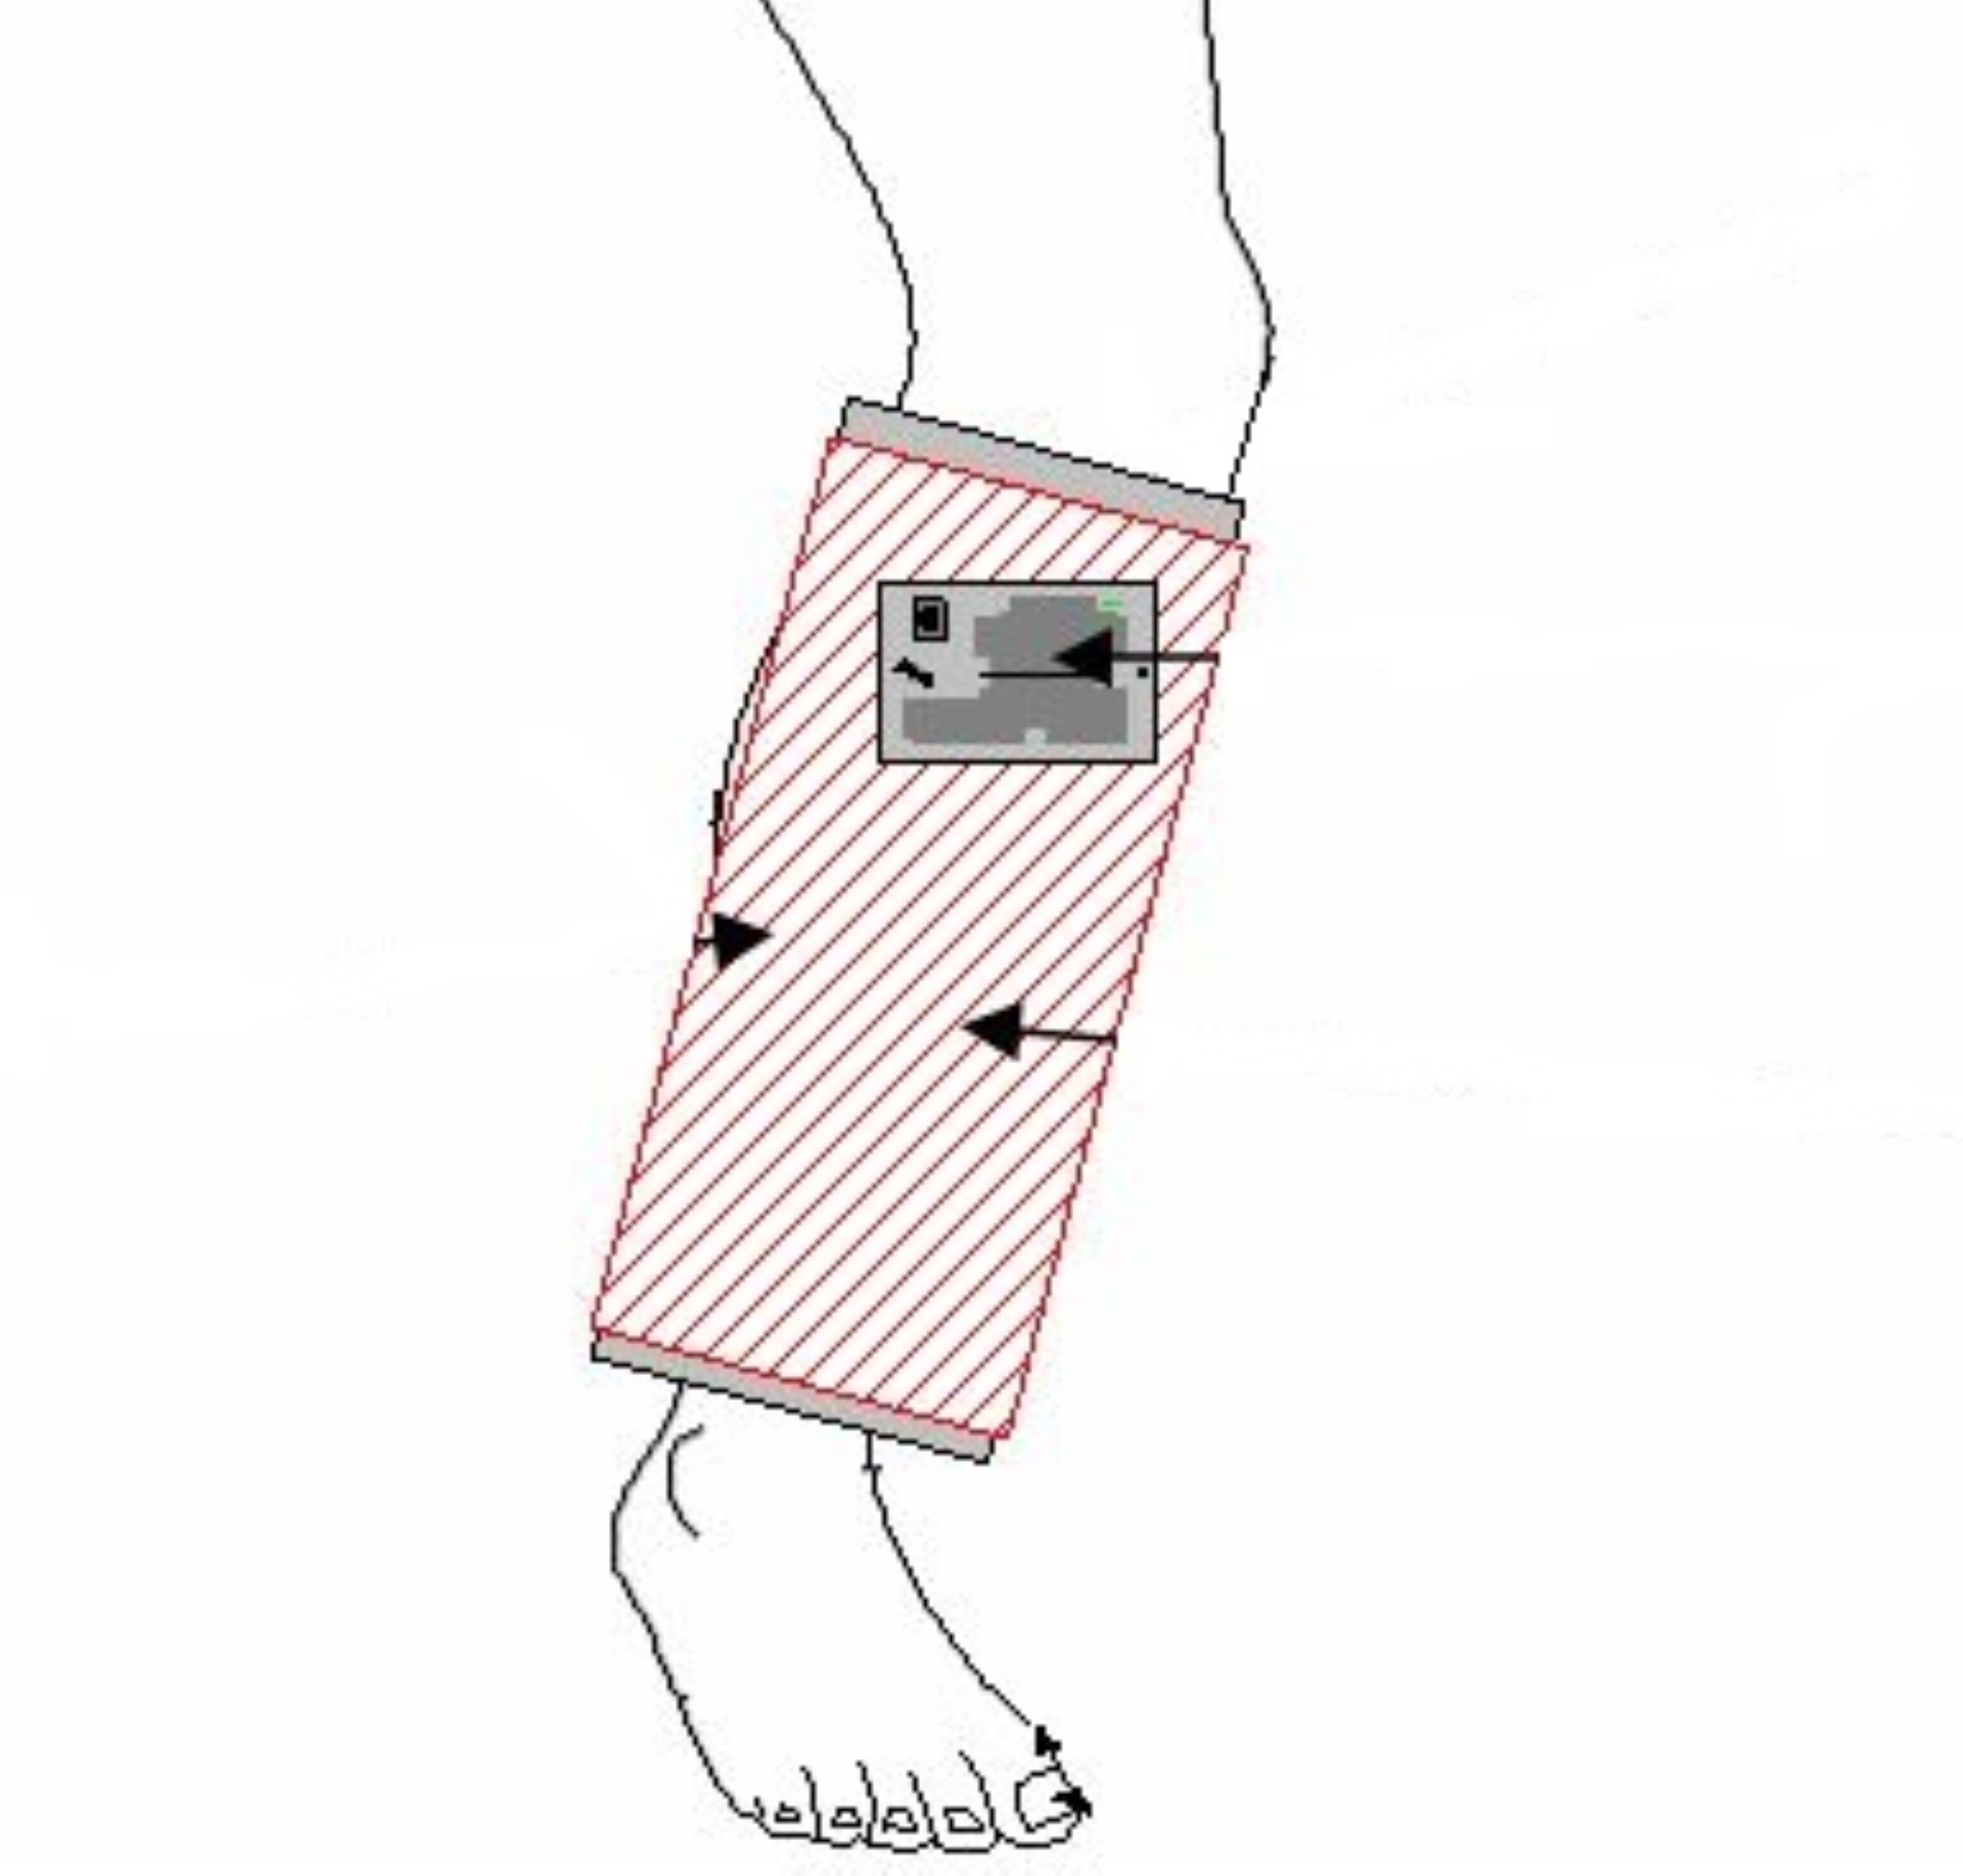 Shown is an illustration of the device sleeve encircling an affected appendage. The device is easily portable and is designed to mend soft tissue and enhance the repair of bone fractures.